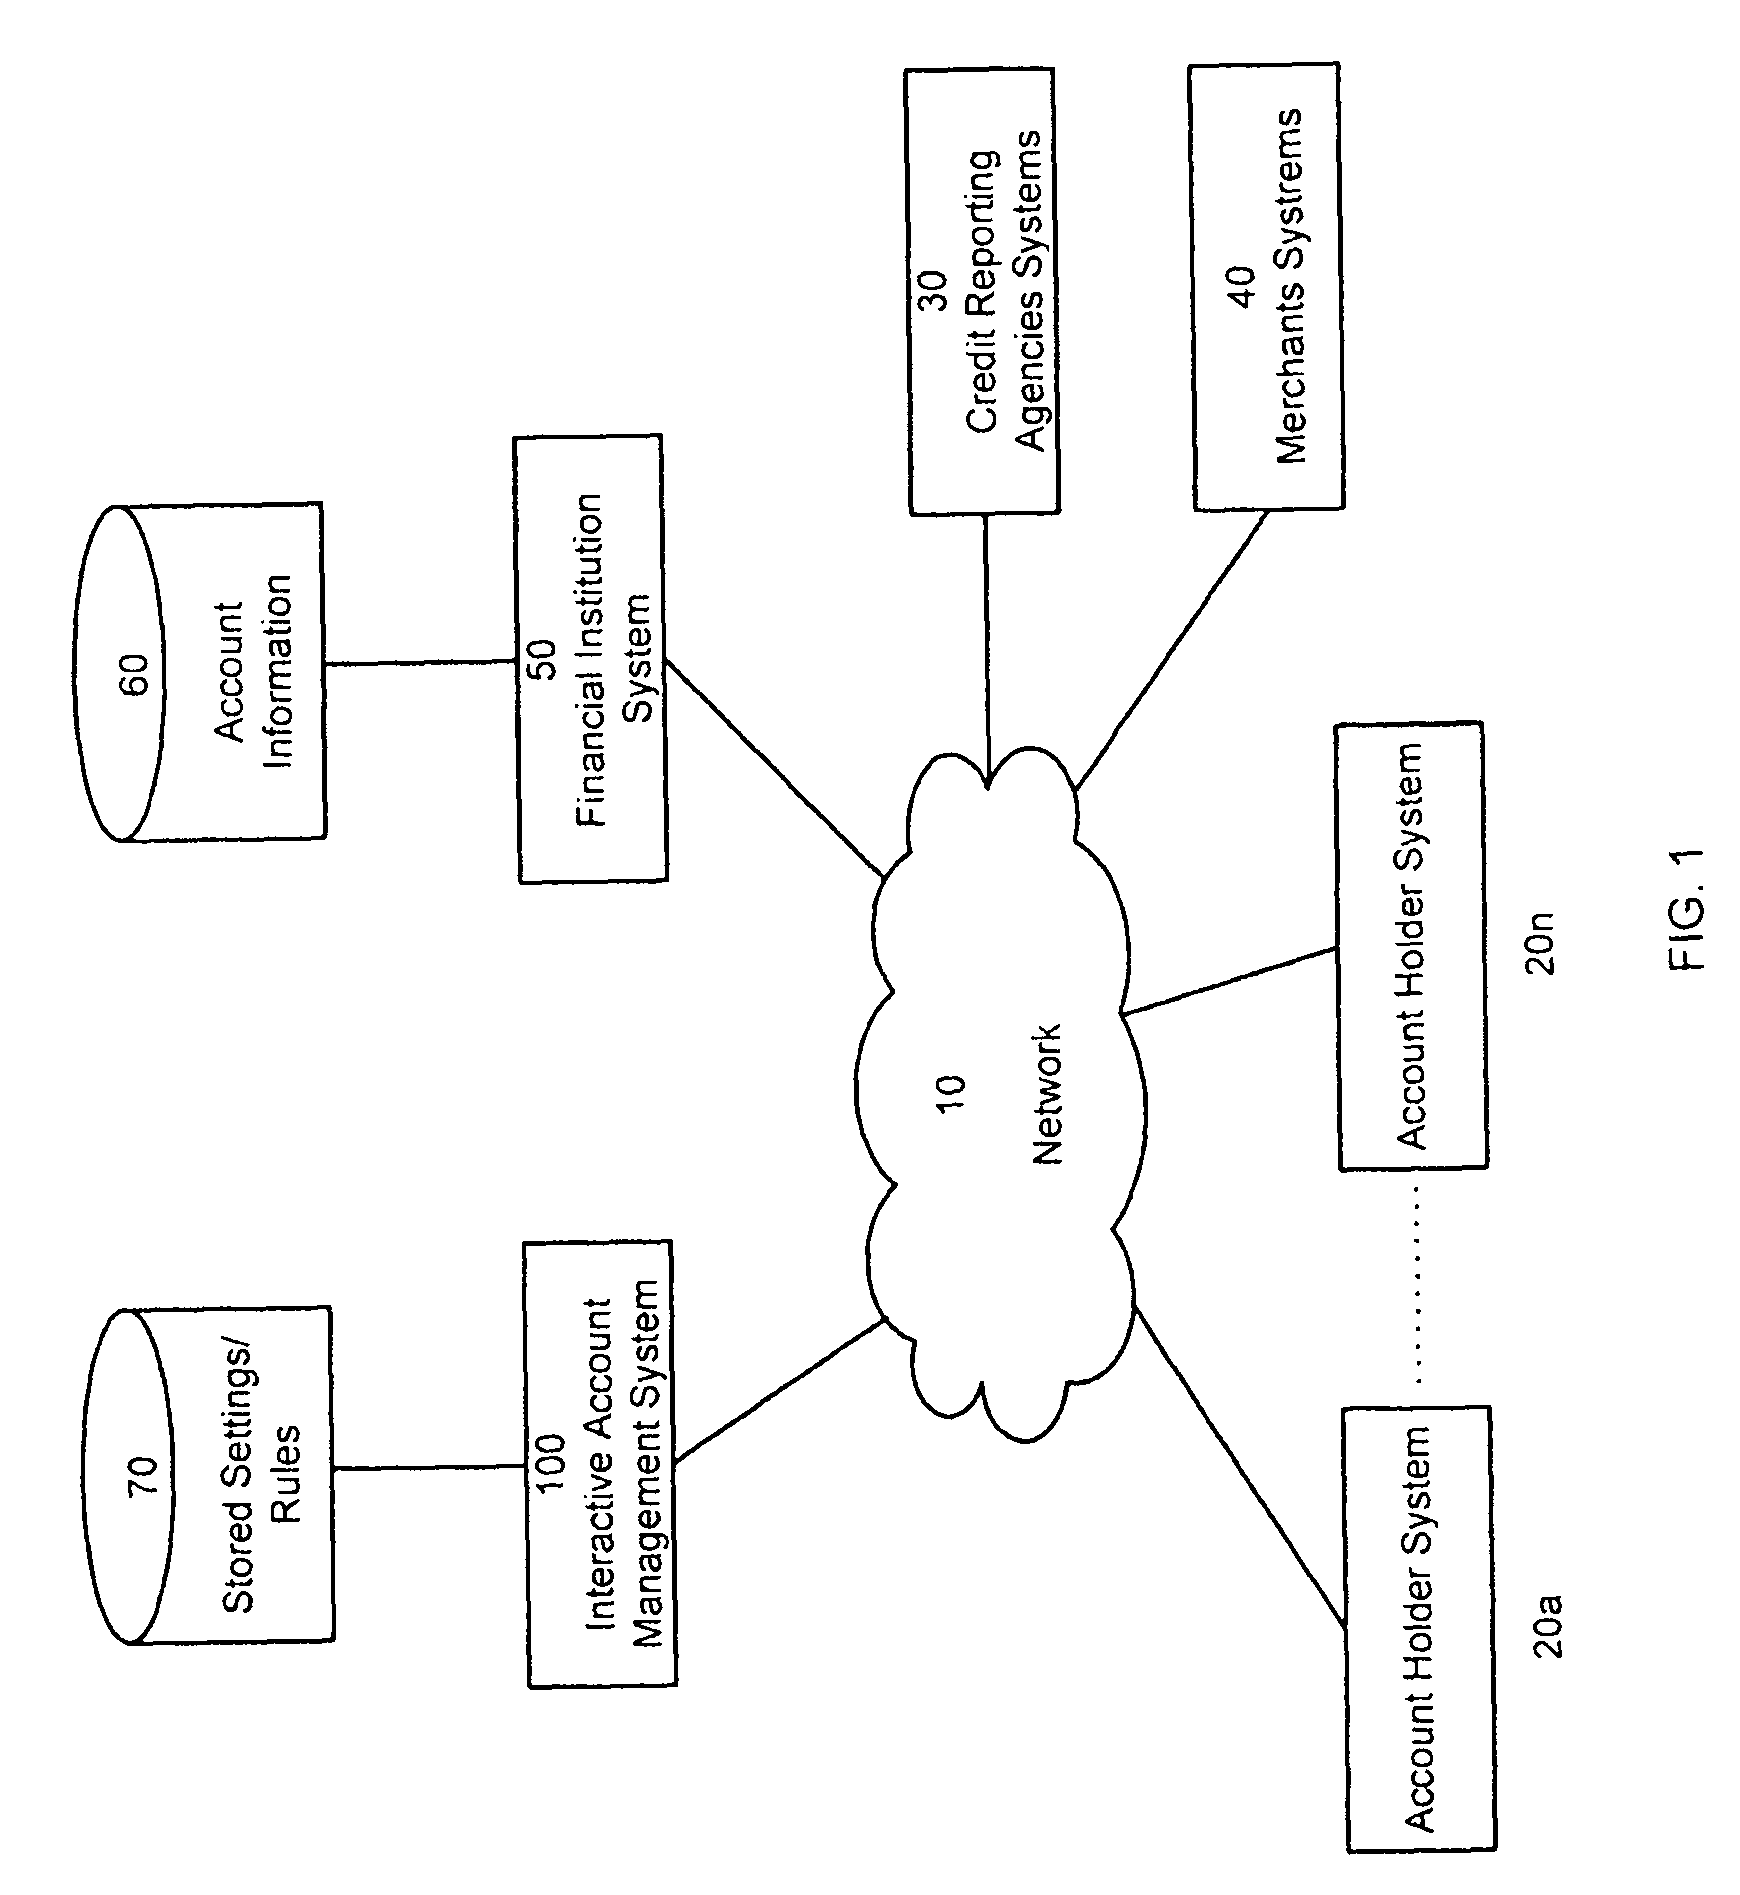 Interactive account management system and method